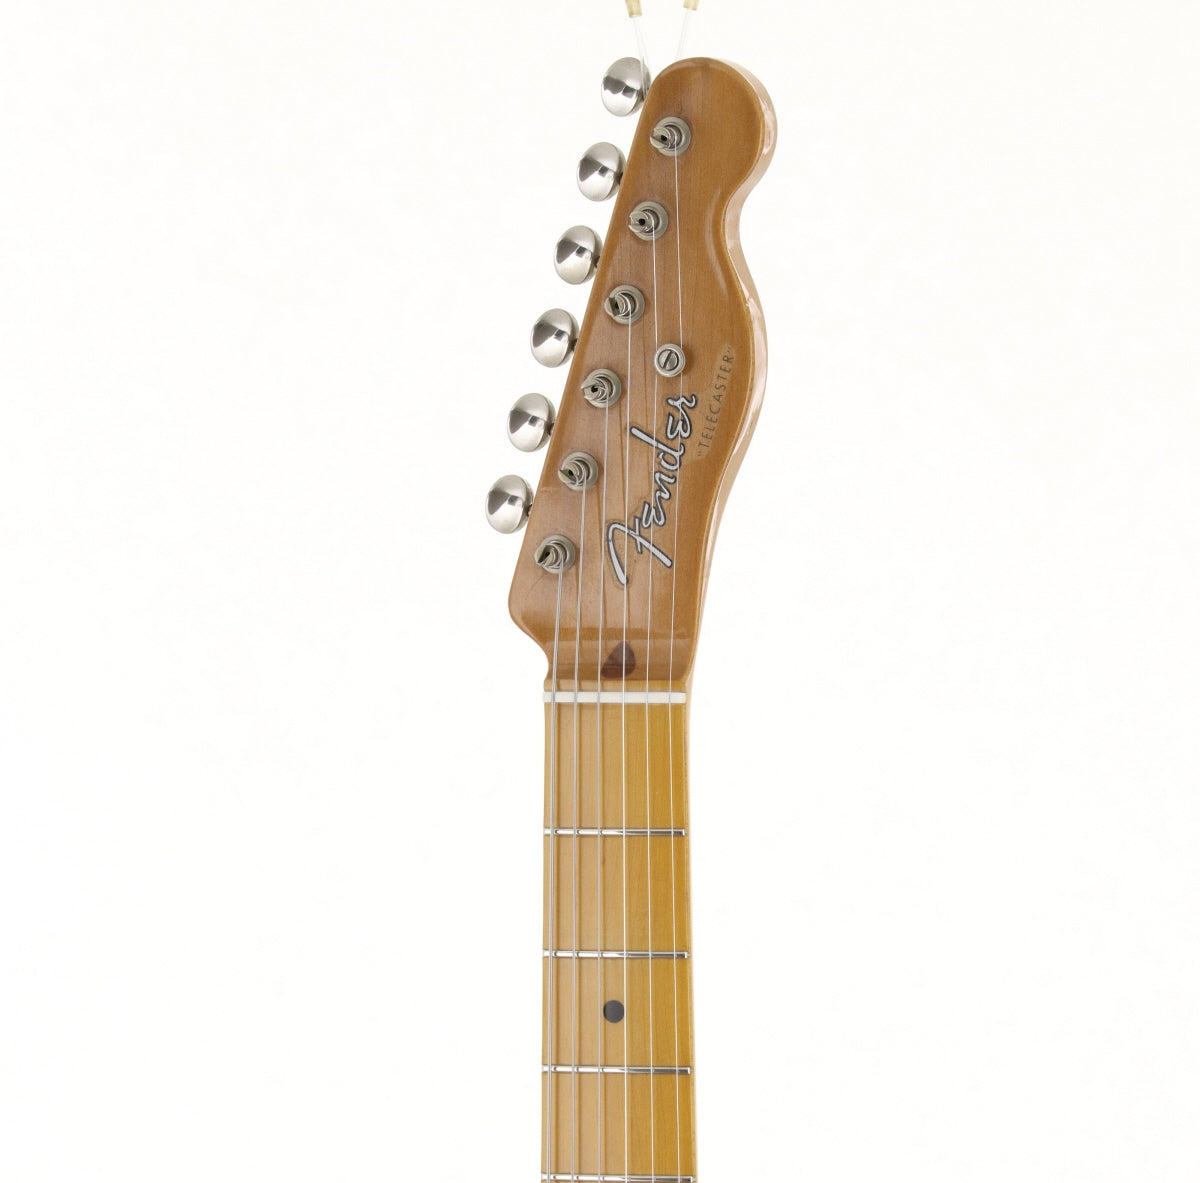 [SN 39628] USED Fender USA / American Vintage 52 Telecaster Thin Lacquer Butter Scotch Blonde [03]